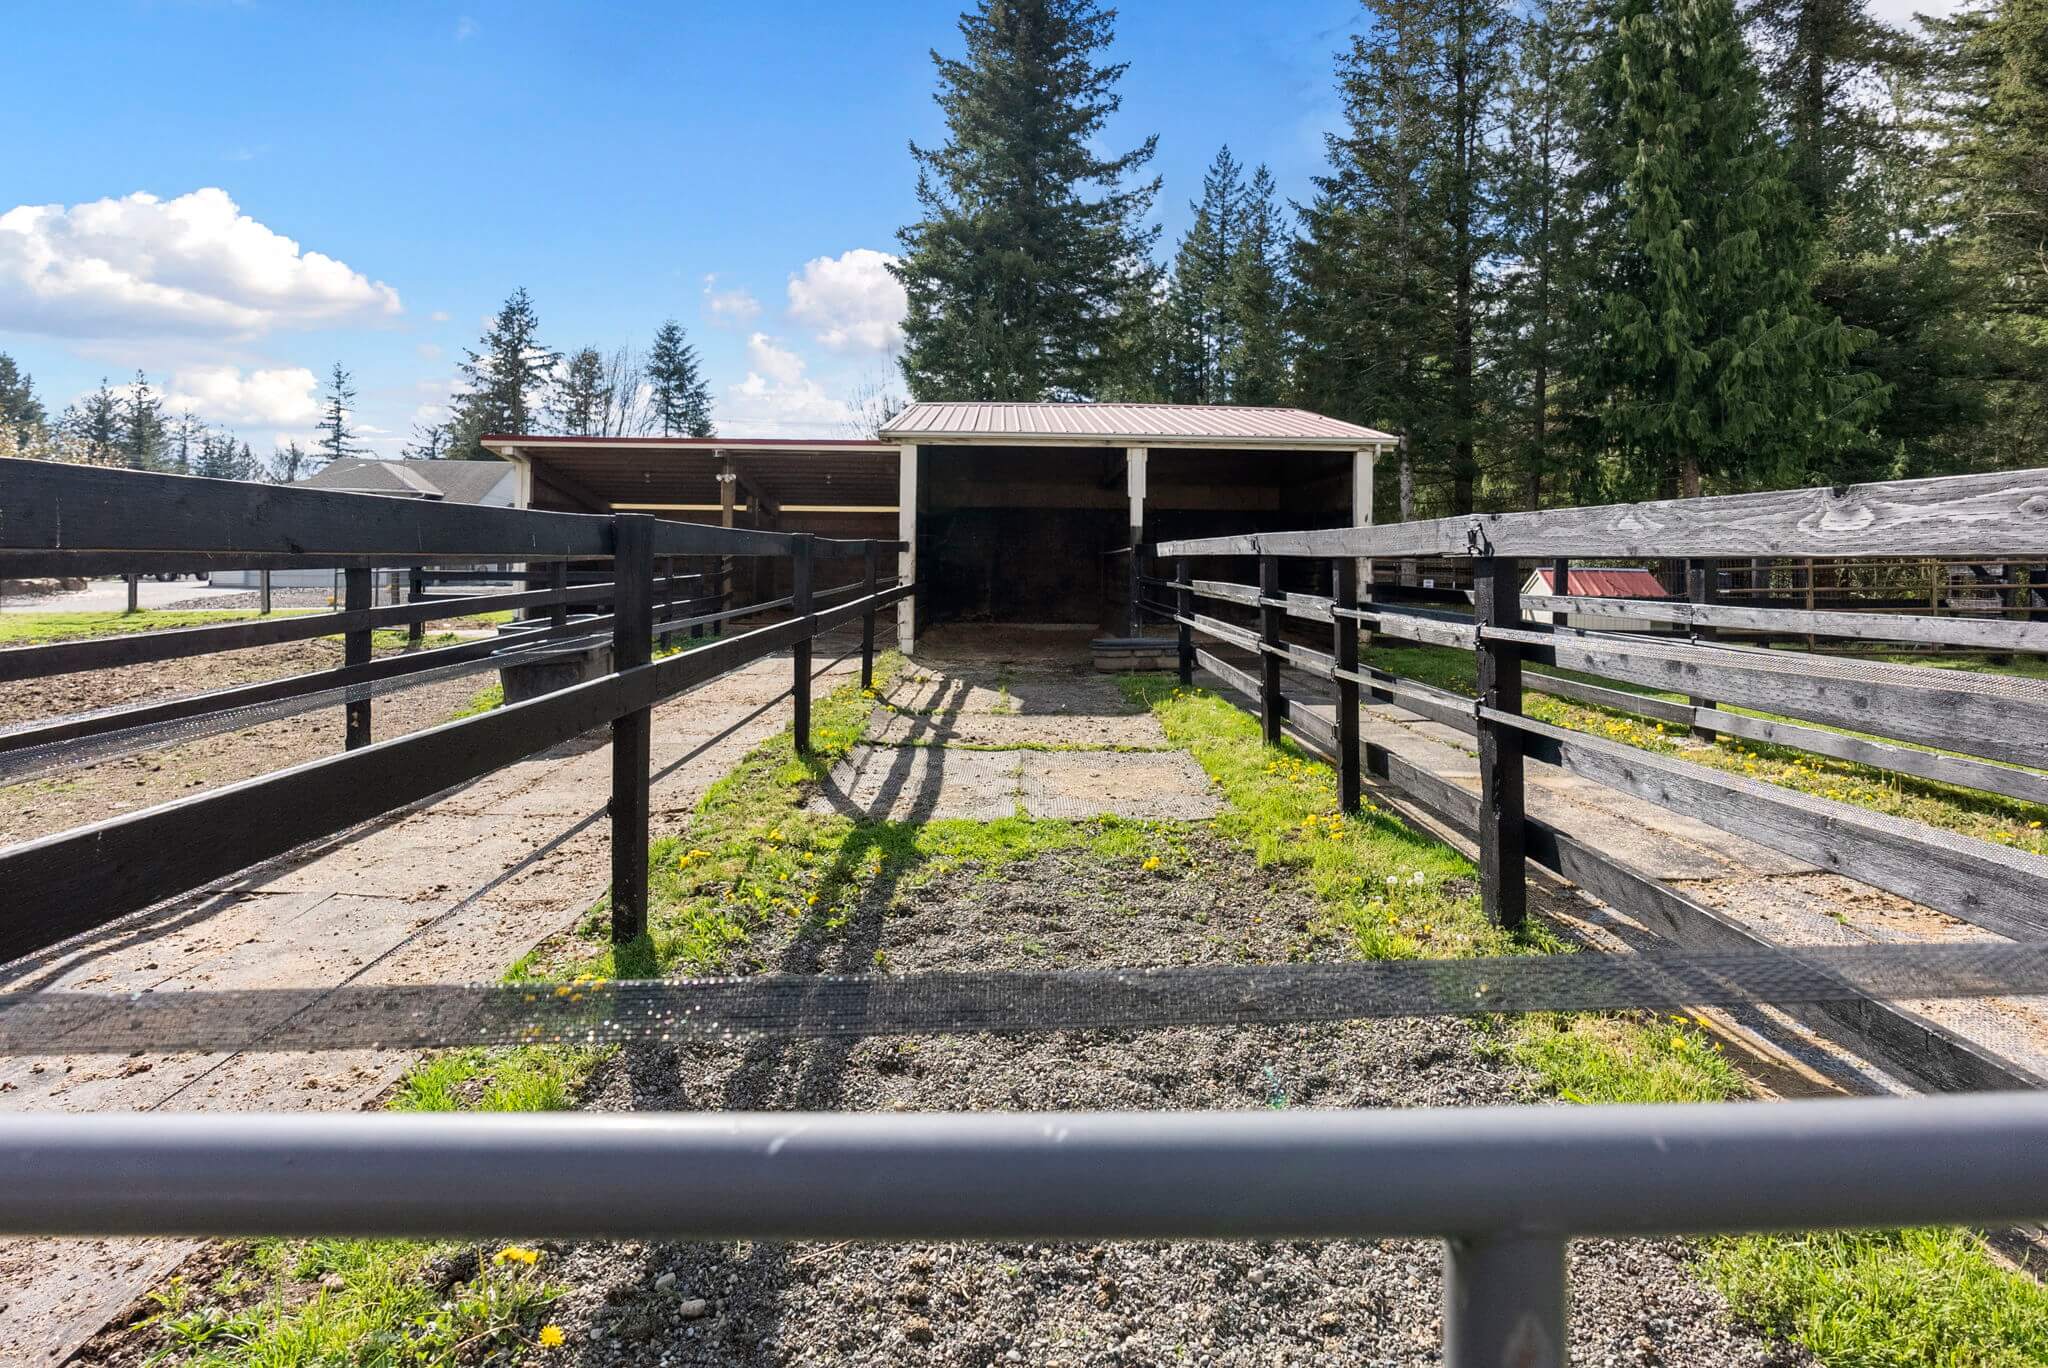 Third smaller barn with four run-in stalls, each with its own paddock